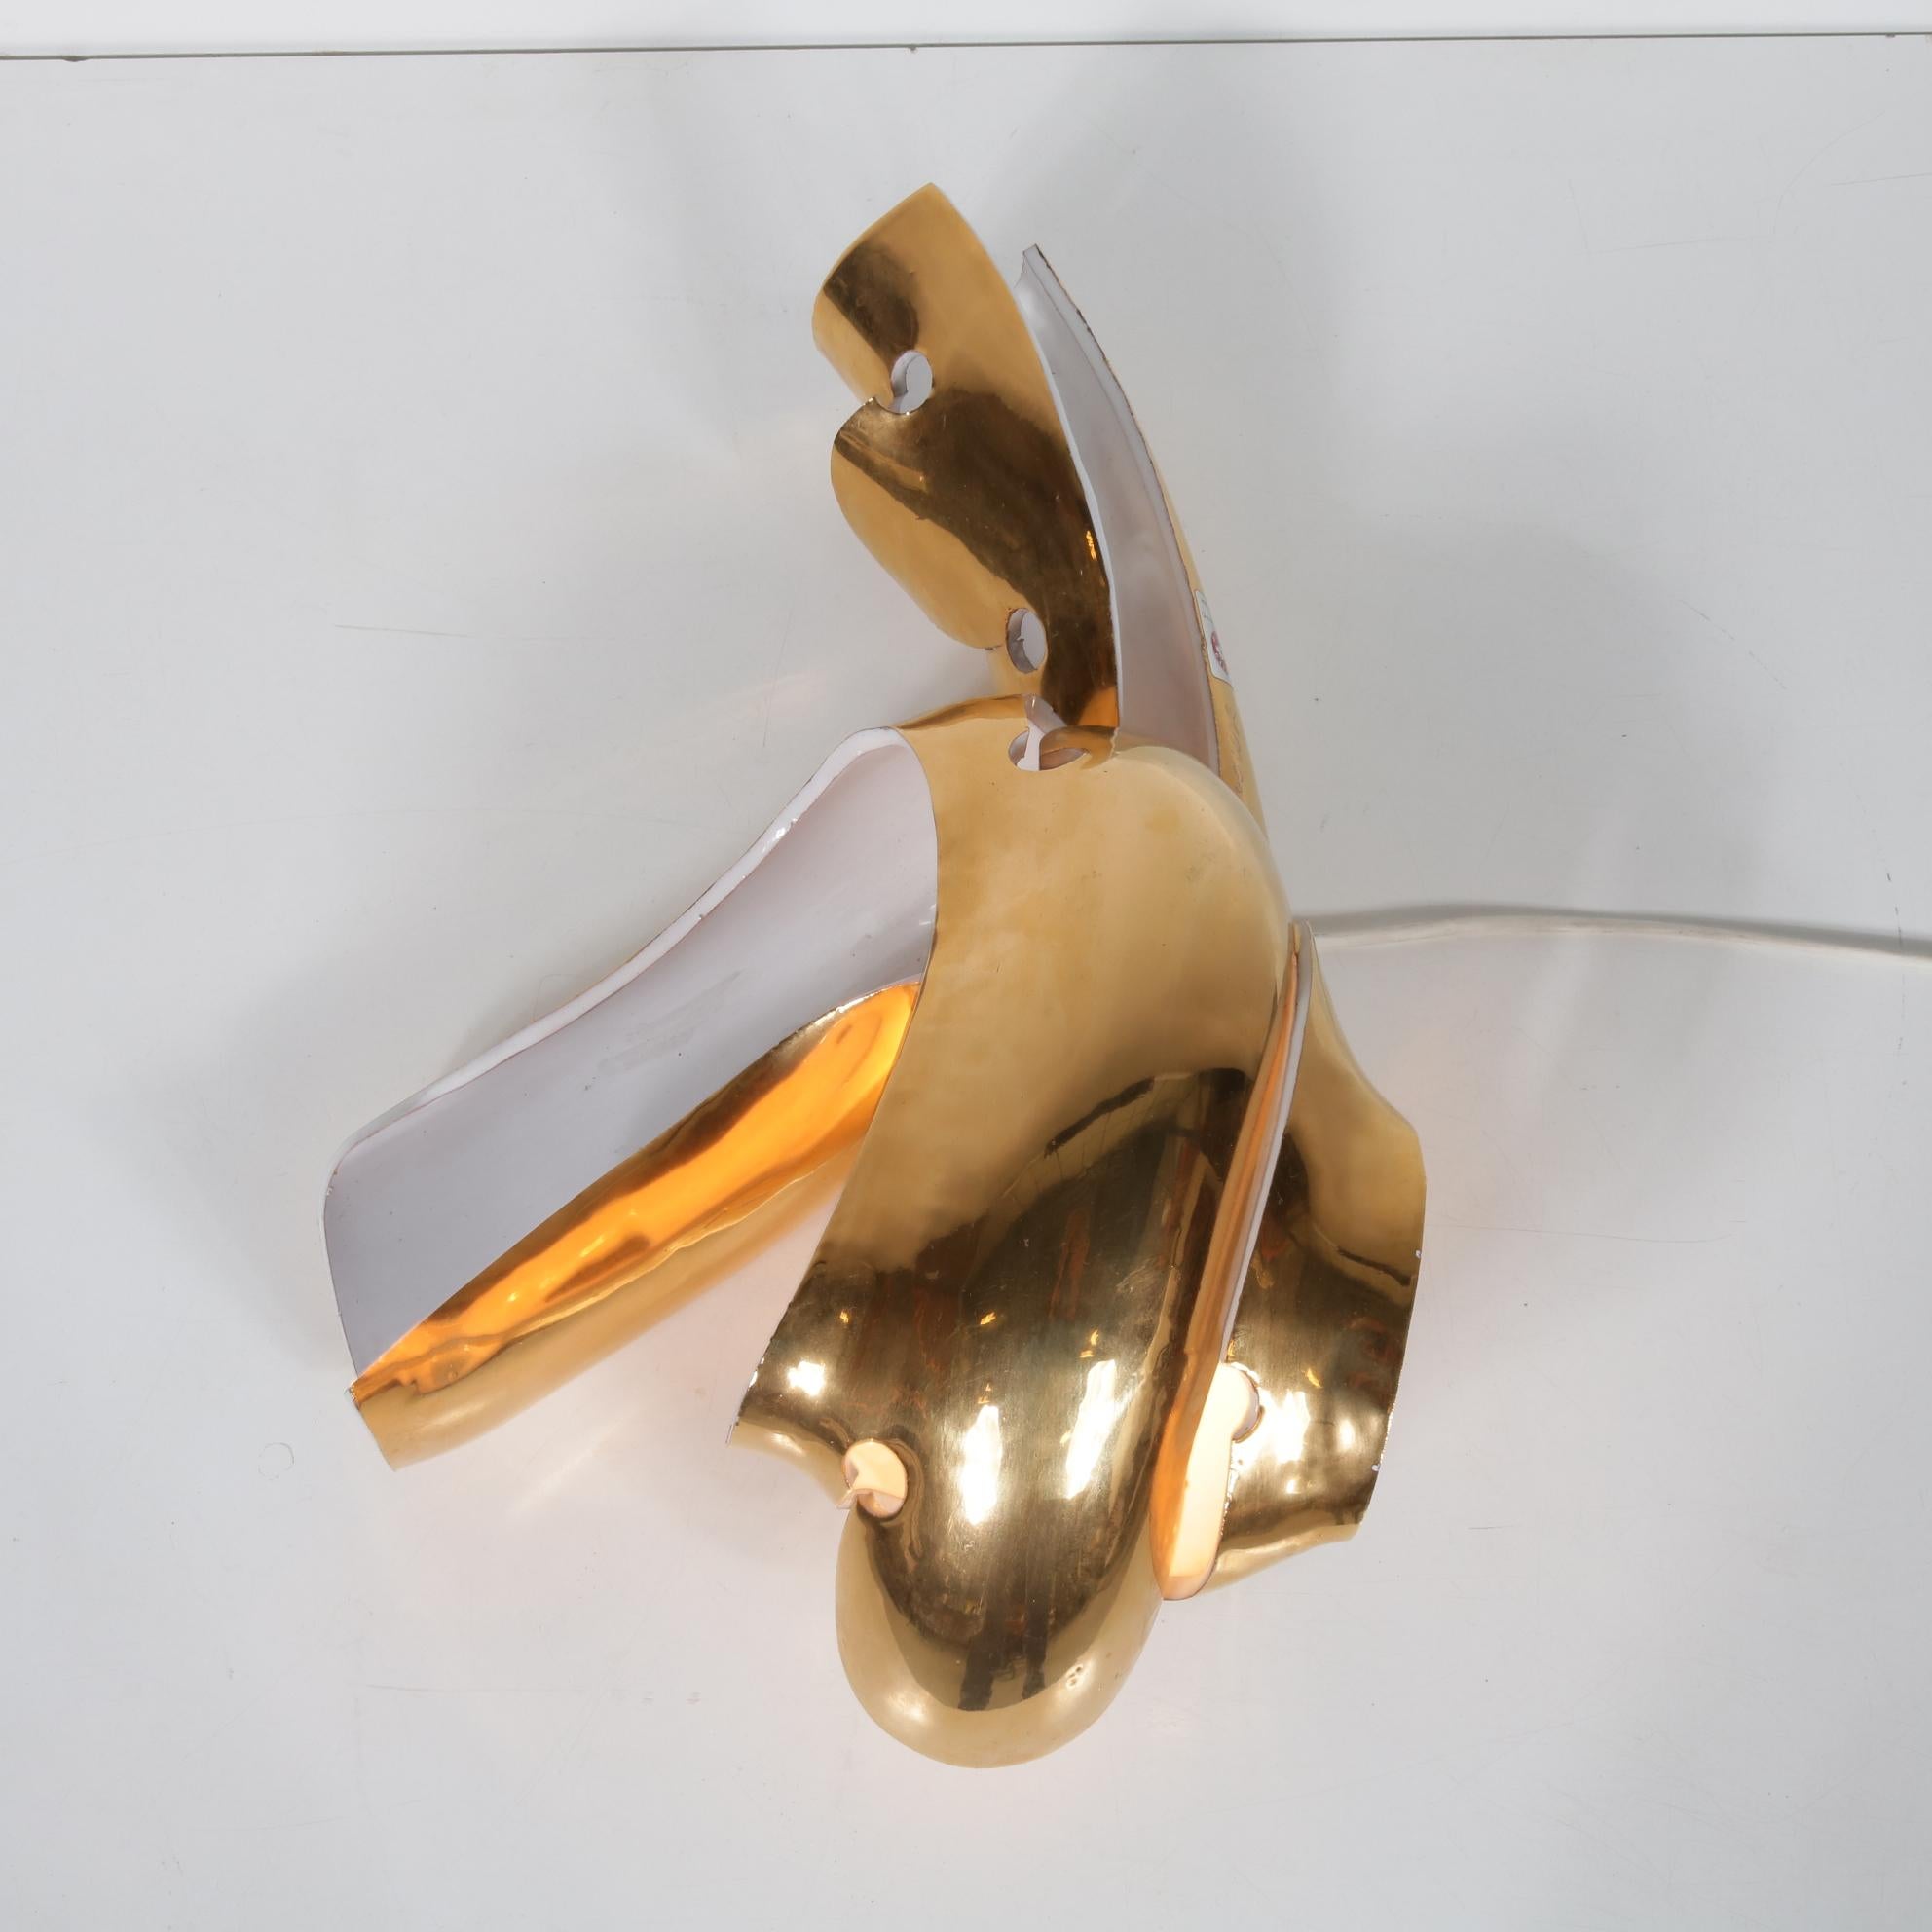 Sculptural Table Light by Amadeo Fiorese for Cermiche Fiorese, Italy 1960 In Good Condition For Sale In Amsterdam, NL